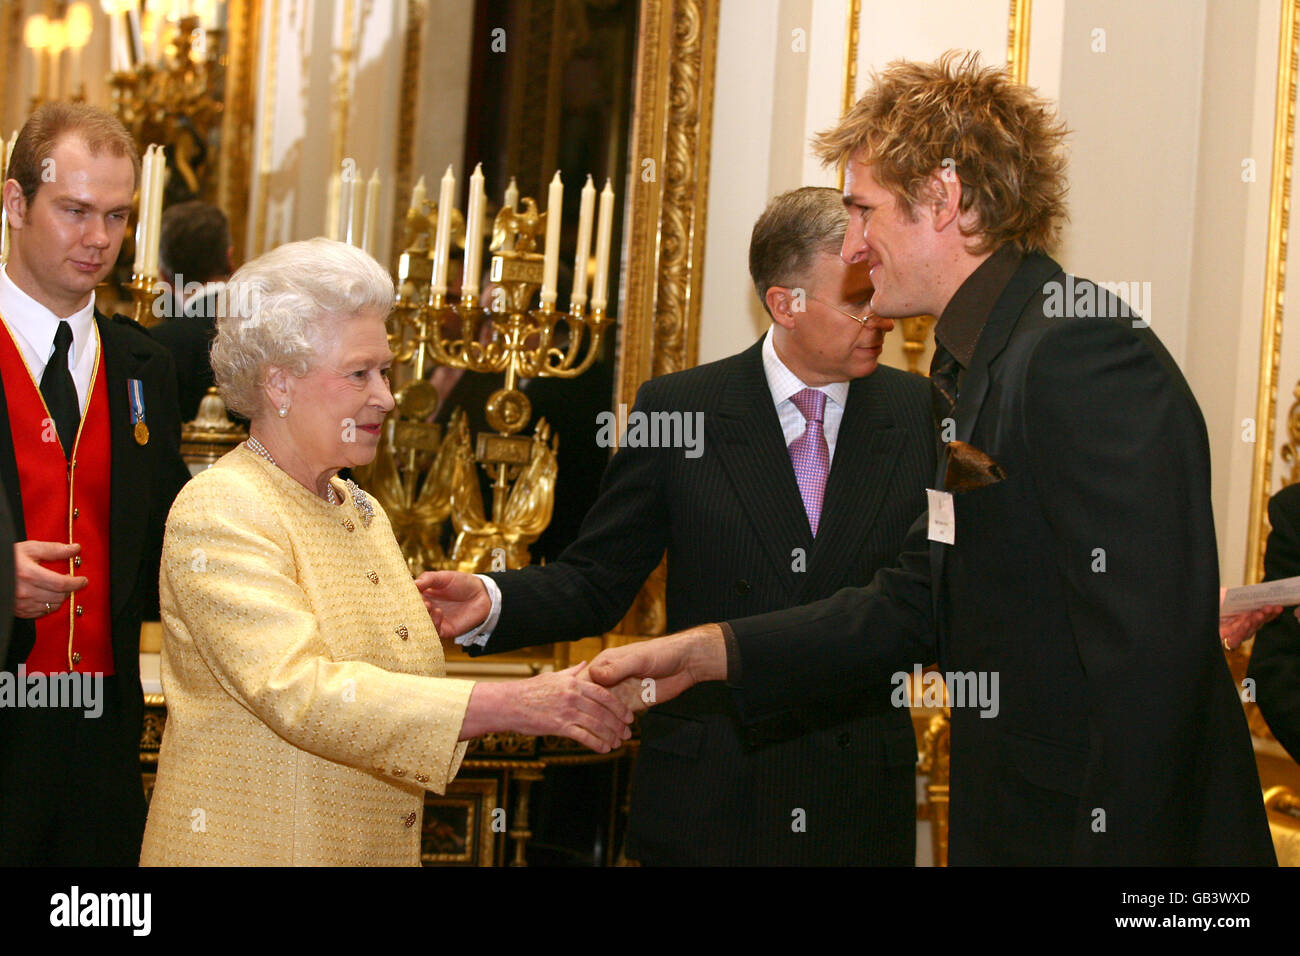 The Queen chats to Curtis Stone, Australian TV chef, during a recepton for 'Prominent Australians' at Buckingham Palace, in central London. The reception was held ahead Her Majesty's visit to Australia for the Commonwealth Games. Stock Photo